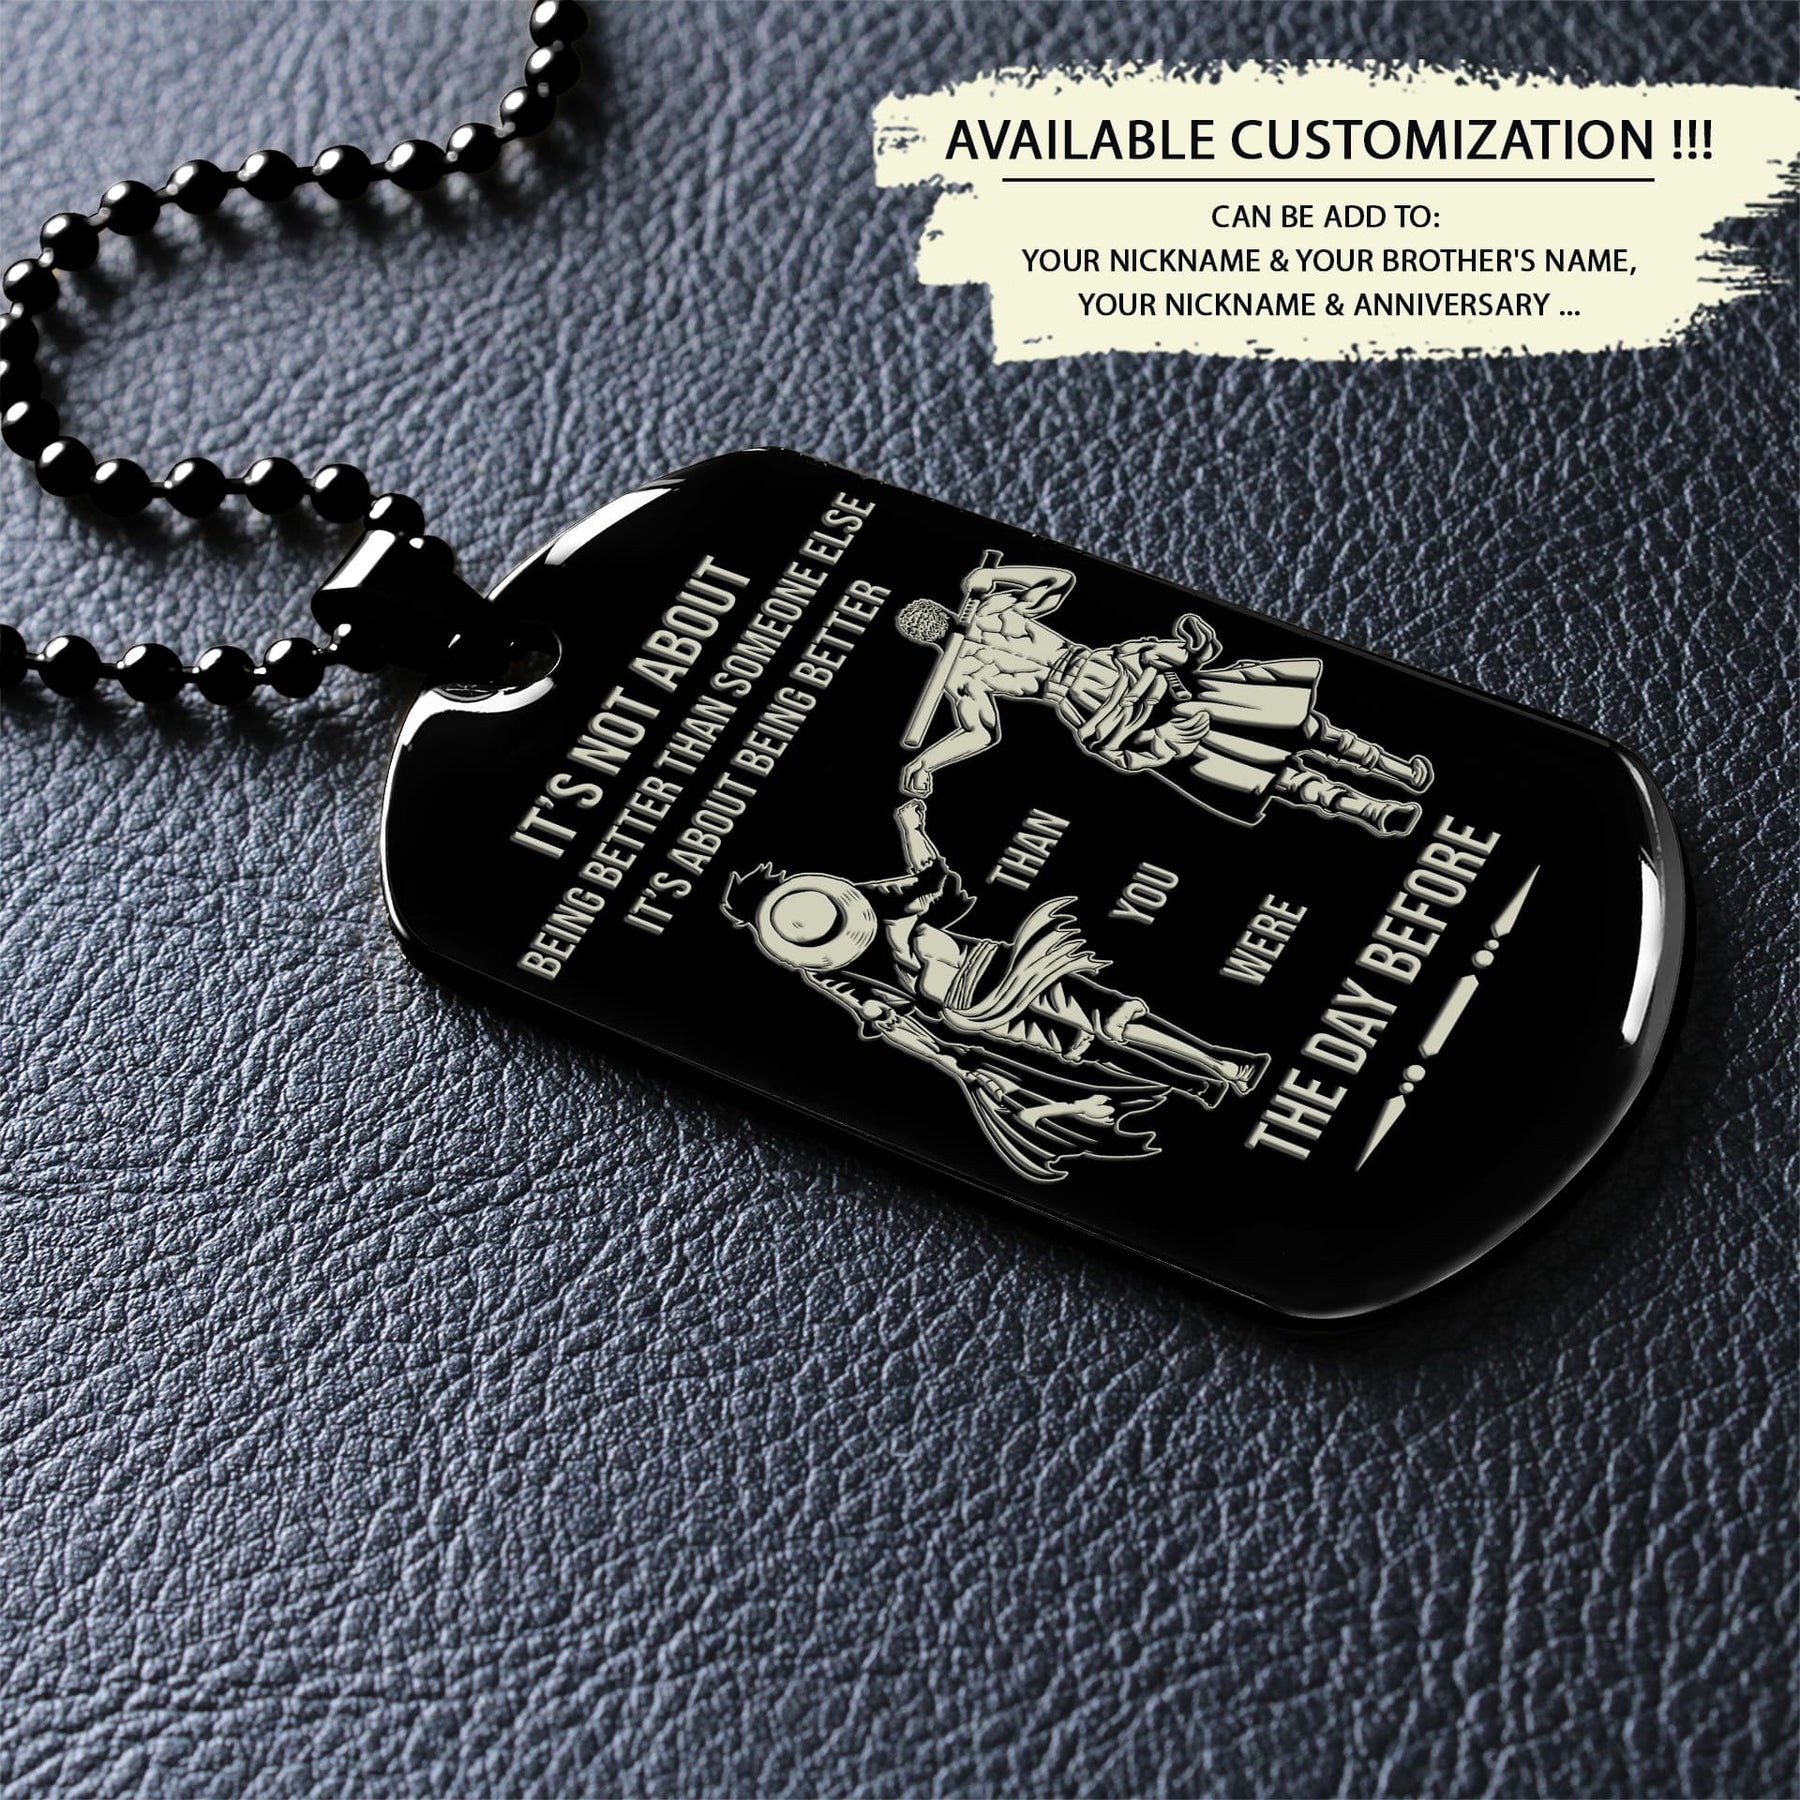 OPD017 - It's Not About Being Better Than Someone Else - It's About Being Better Than You Were The Day Before - Monkey D. Luffy - Roronoa Zoro - One Piece Dog Tag - Engrave Black Dog Tag